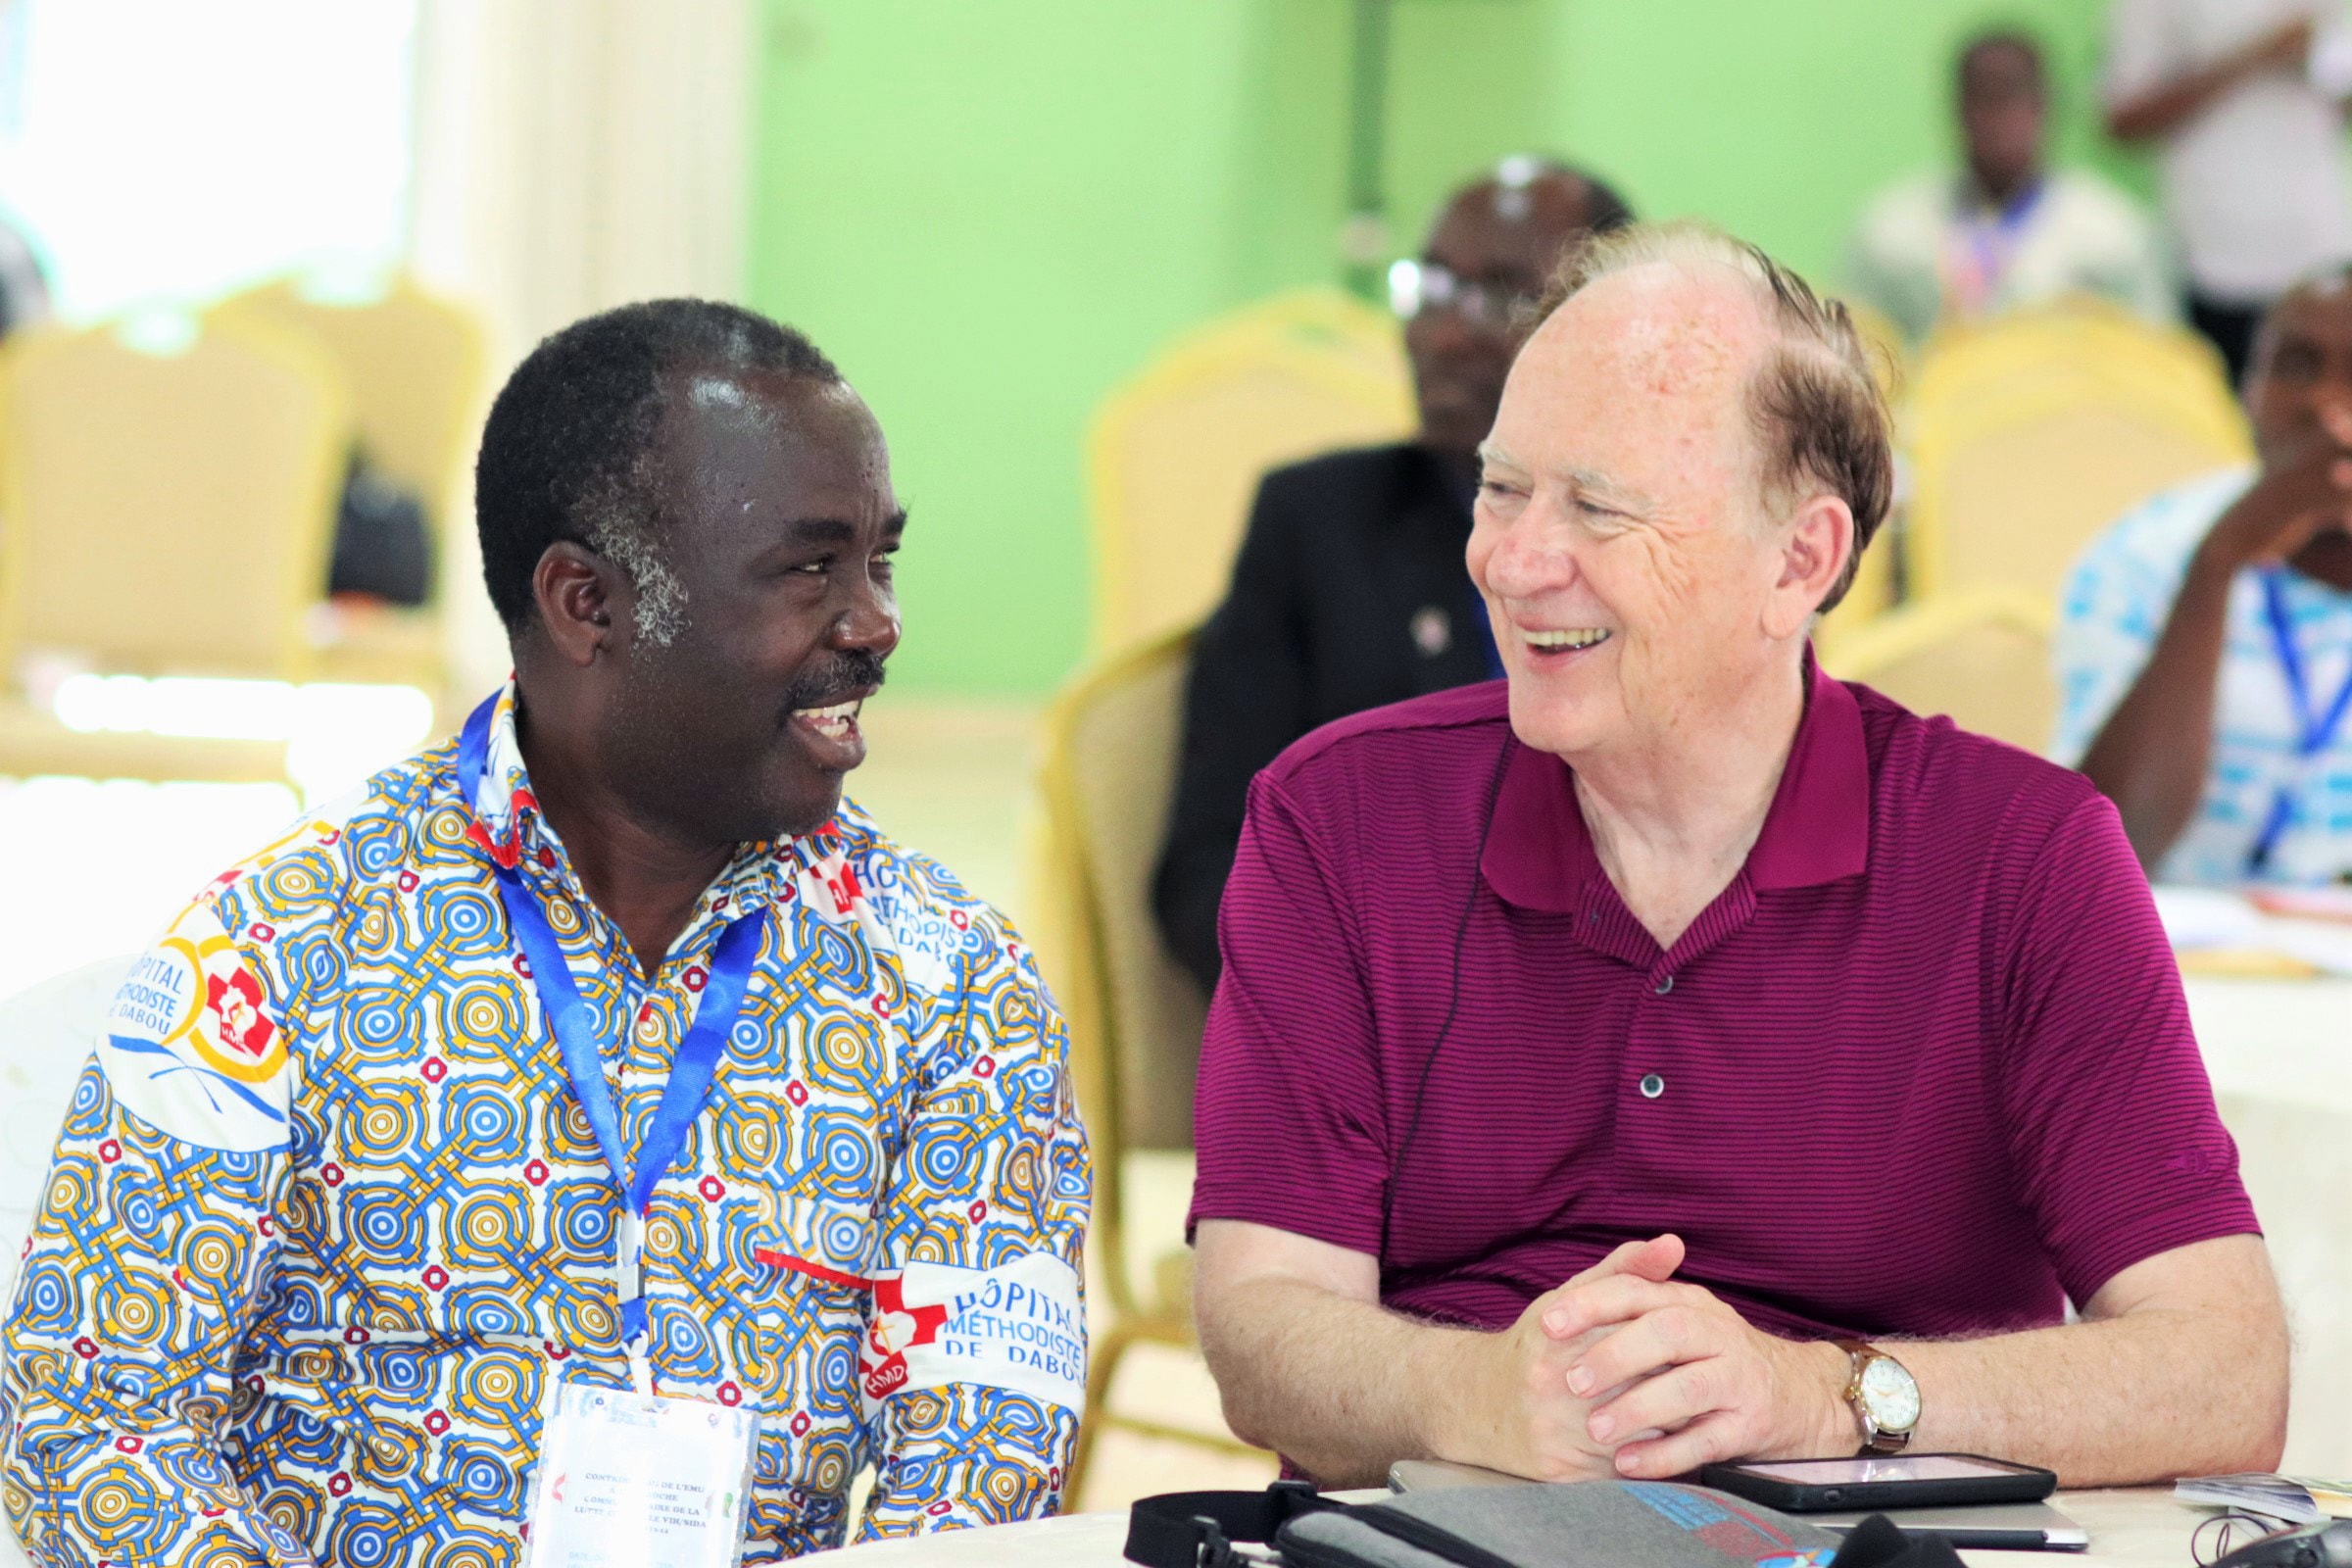 Dr. Daniel Ahui (left), director of the United Methodist Hospital in Dabou, and the Rev. Donald Messer, executive director of the United Methodist-related Center for Health and Hope, at the summit. The Dabou hospital is providing care to 1,362 HIV patients. Photo by Isaac Broune, UMNS.